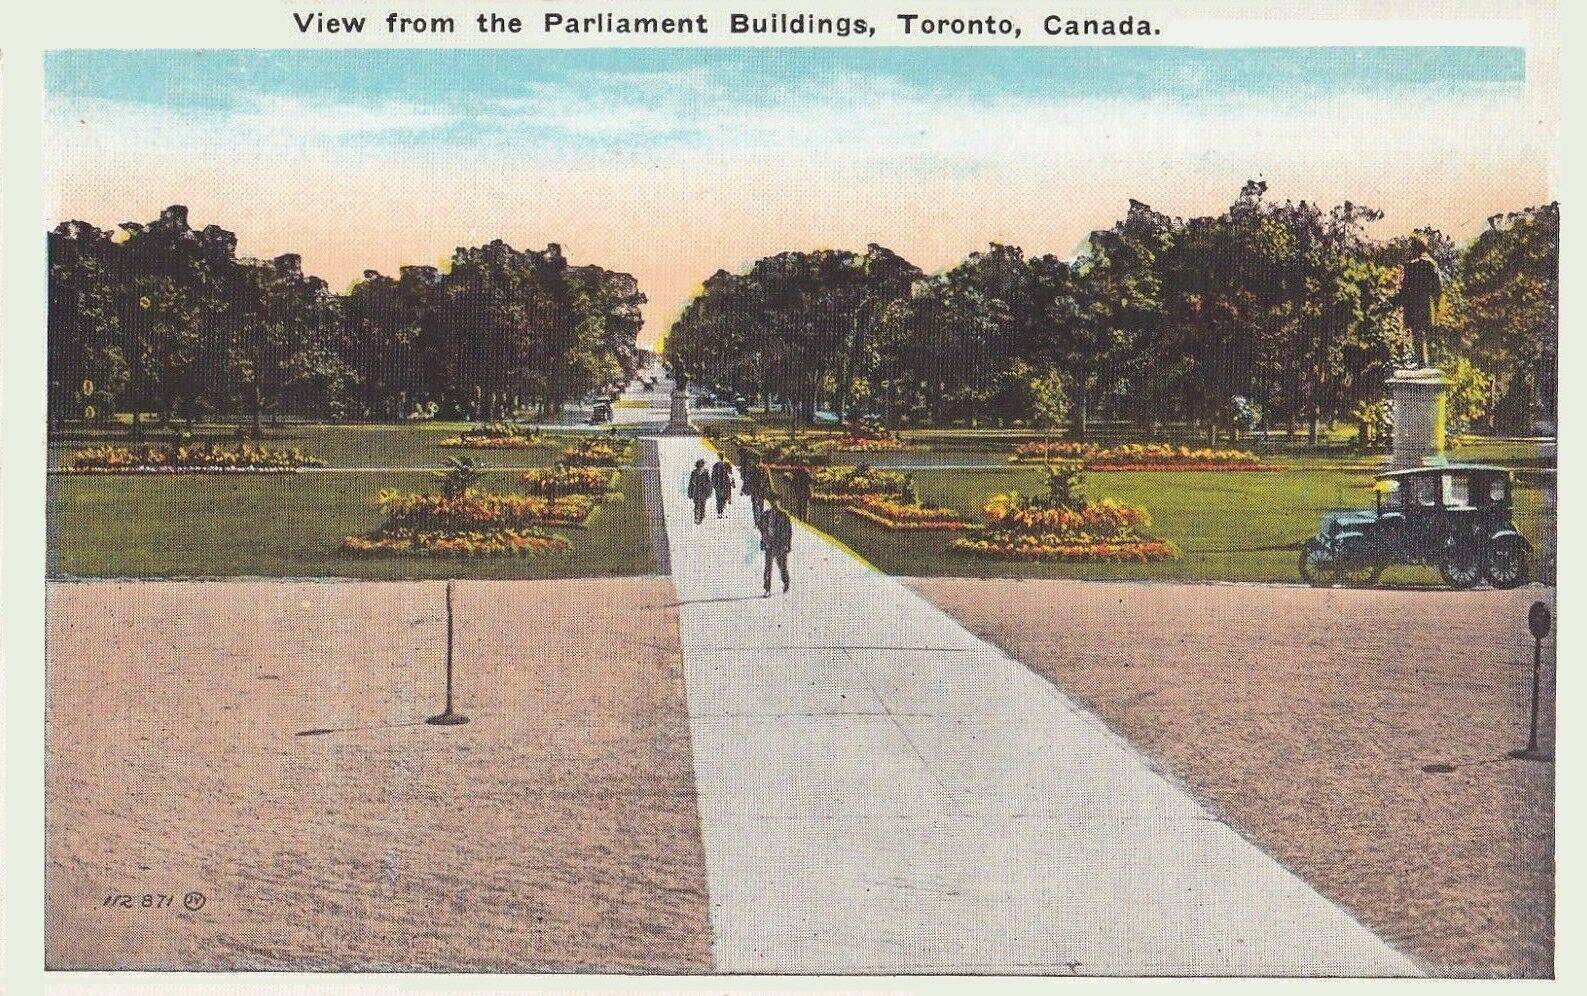 POSTCARD - TORONTO - VIEW DOWN (THEN) TREE-LINED UNIVERSITY AVE FROM THE ONTARIO PARLIAMENT BUILDINGS - A FEW PEOPLE WALKING - NOTE CAR PARKED NEAR STATUE ON THE RIGHT - TINTED - NICE VERSION - 1915